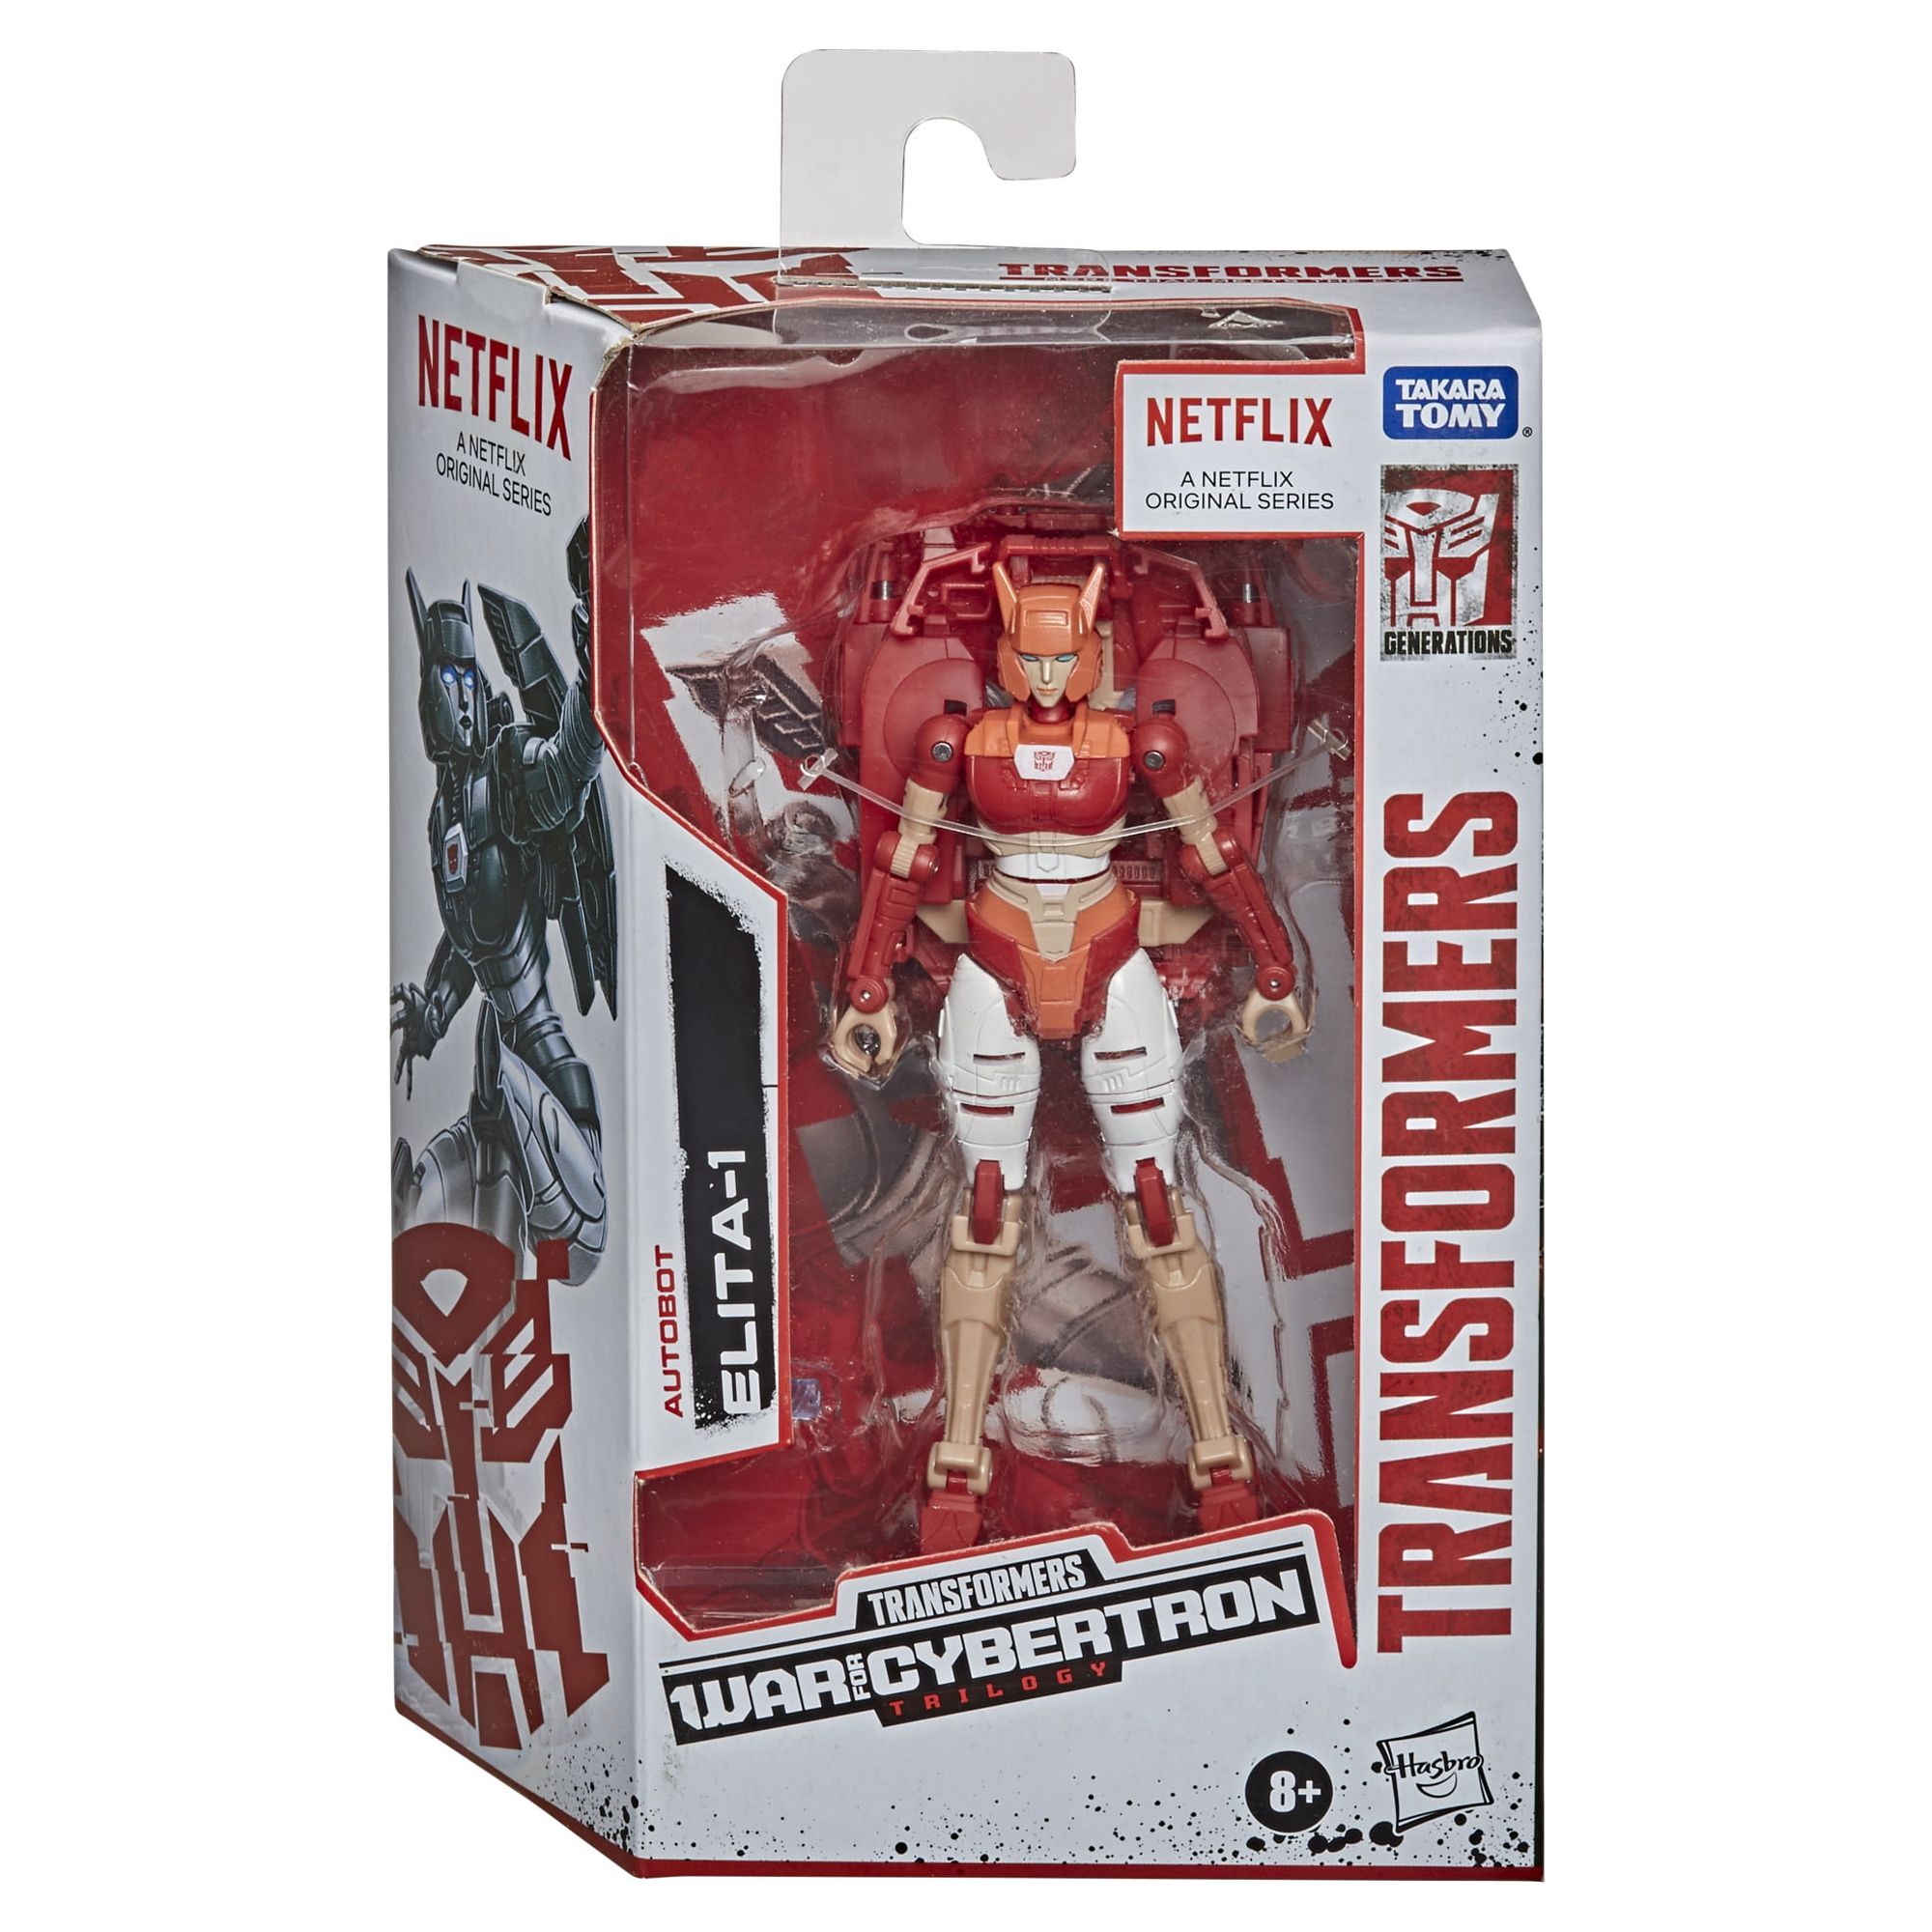 Transformers: War for Cybertron Autobot Elita 1 Kids Toy Action Figure for Boys and Girls (6") - image 3 of 5